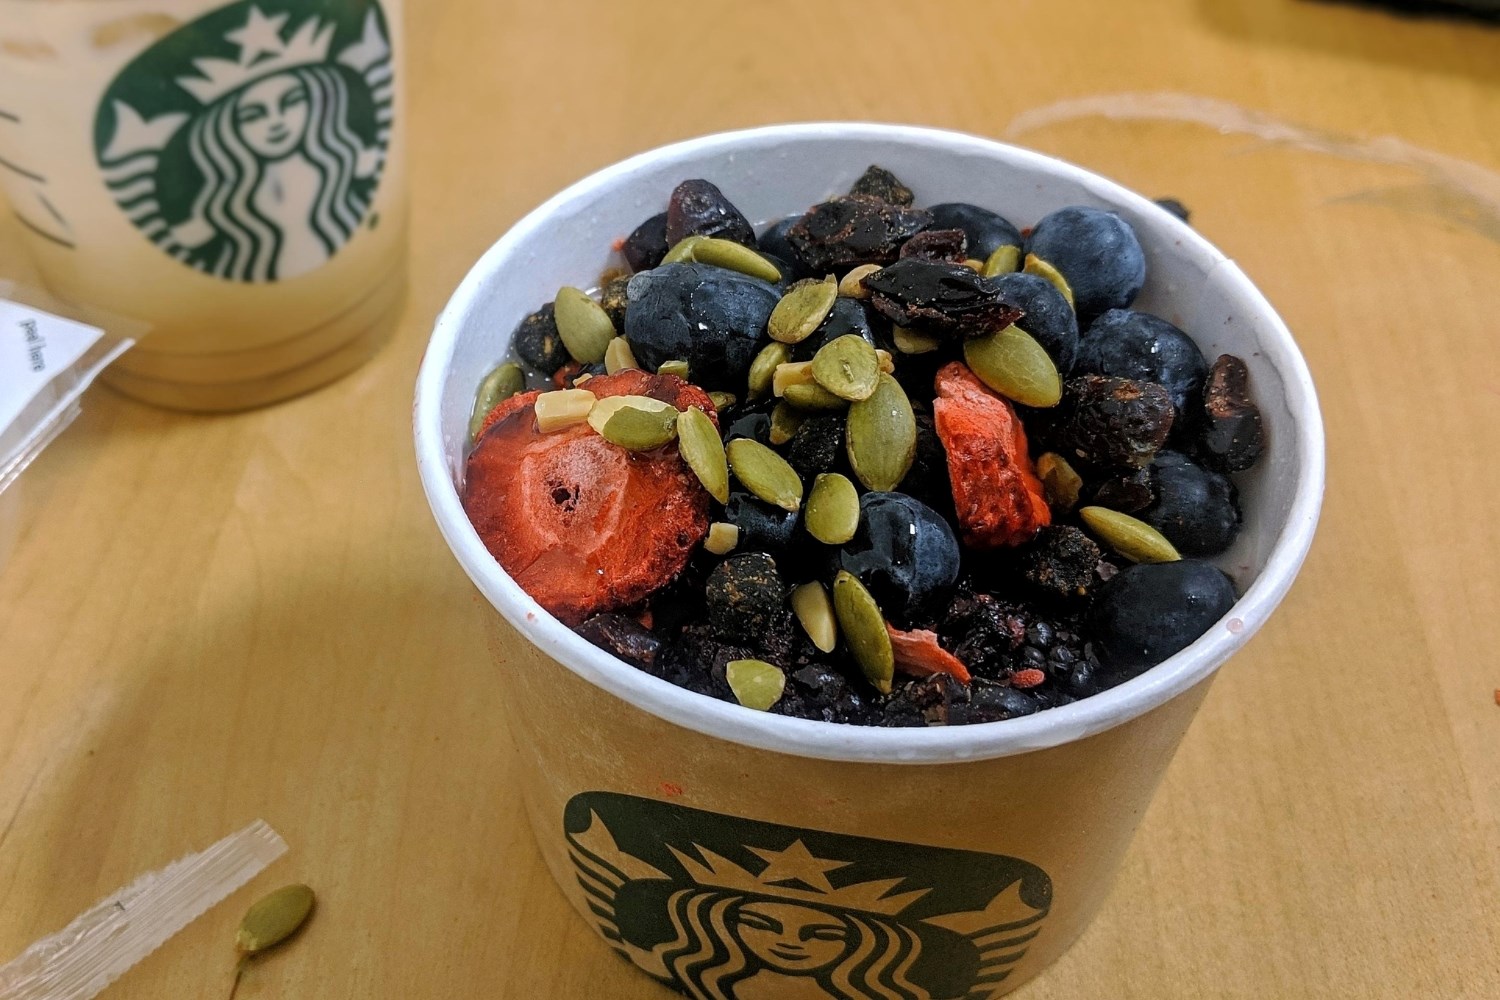 19-starbucks-oatmeal-nutrition-facts